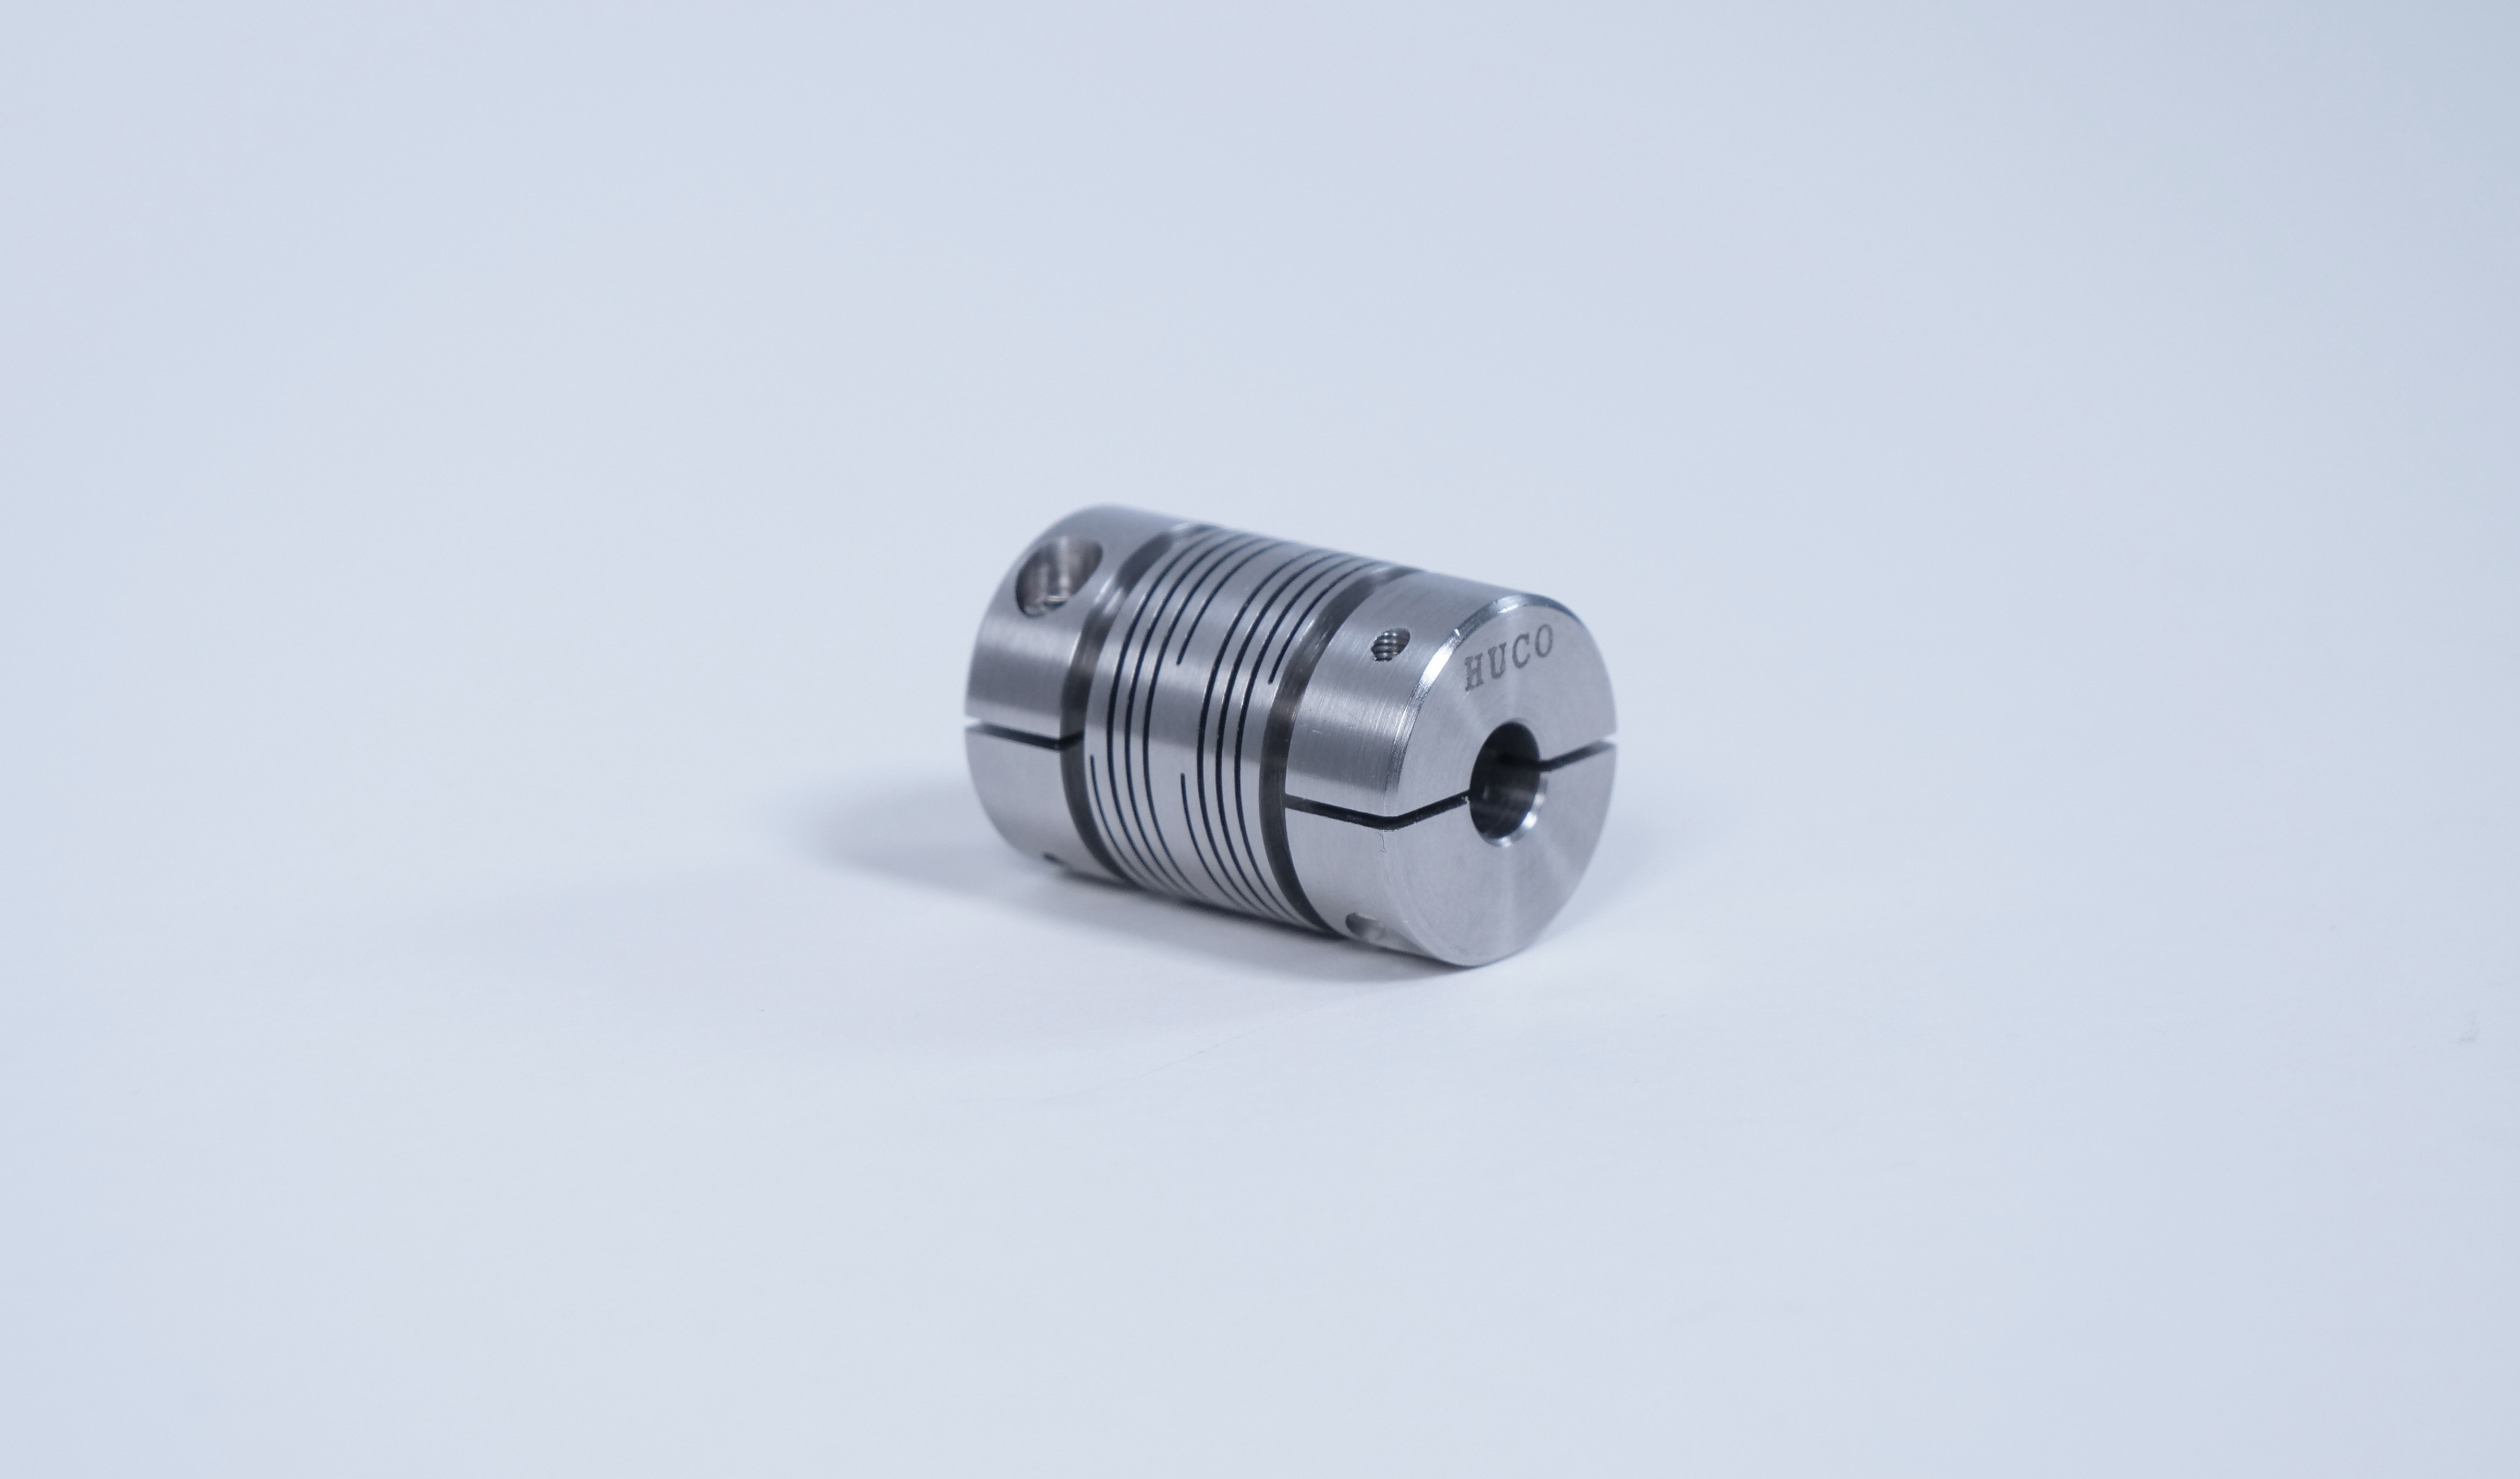 Typically machined from a single piece, Beam couplings are single components, which eliminates the possibility of components separating.